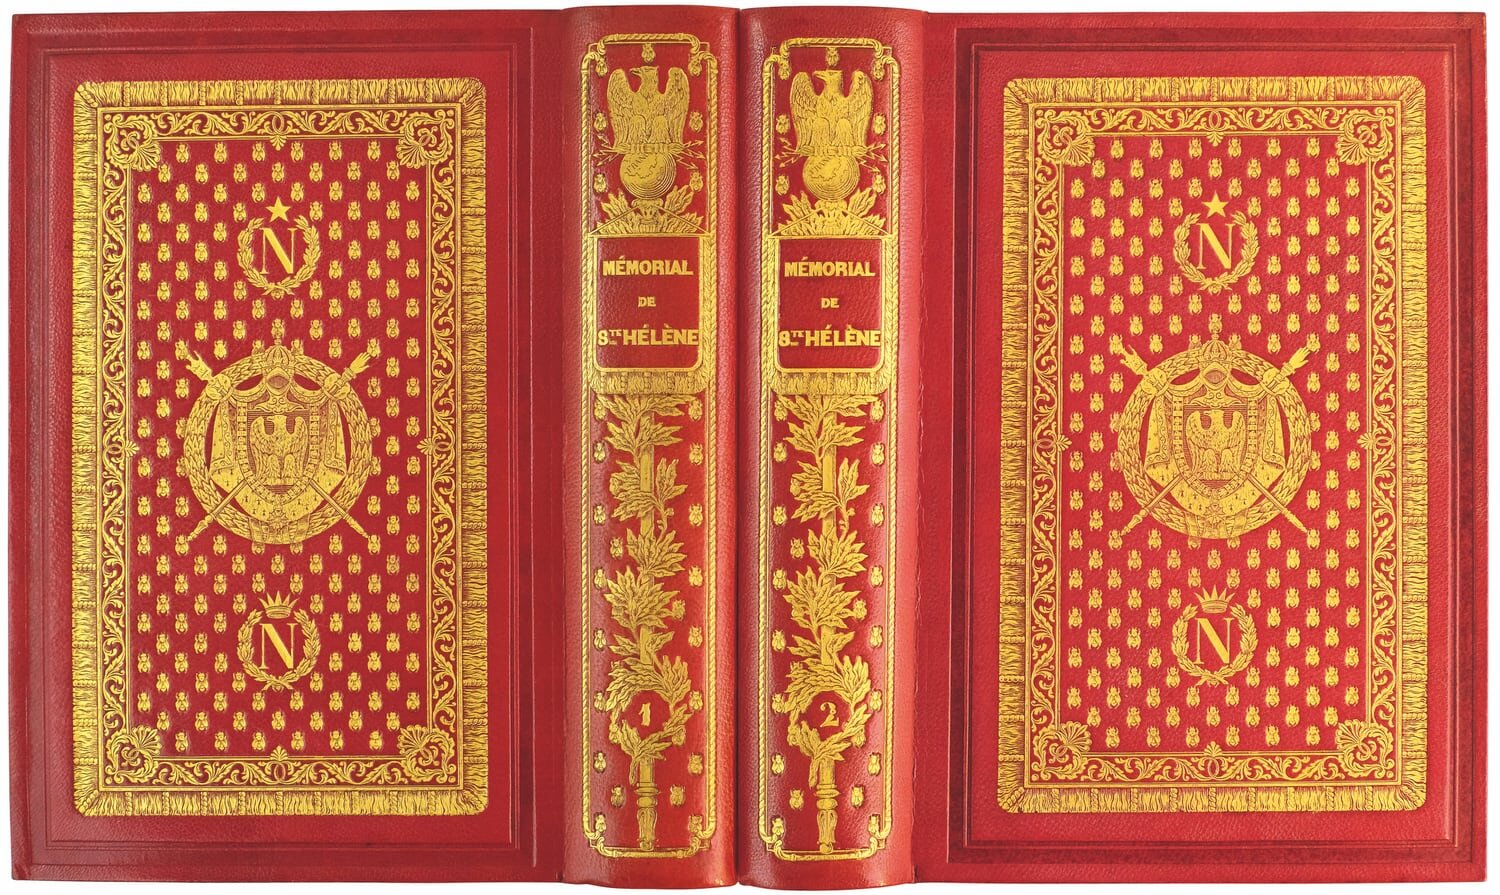   Mémorial de Sainte-Hélène ; two copies in publisher’s bindings by Boutigny, in blue and red morocco [nos. 381-382], and a copy on China paper, bound in velour by Bauzonnet-Trautz [no. 383] 